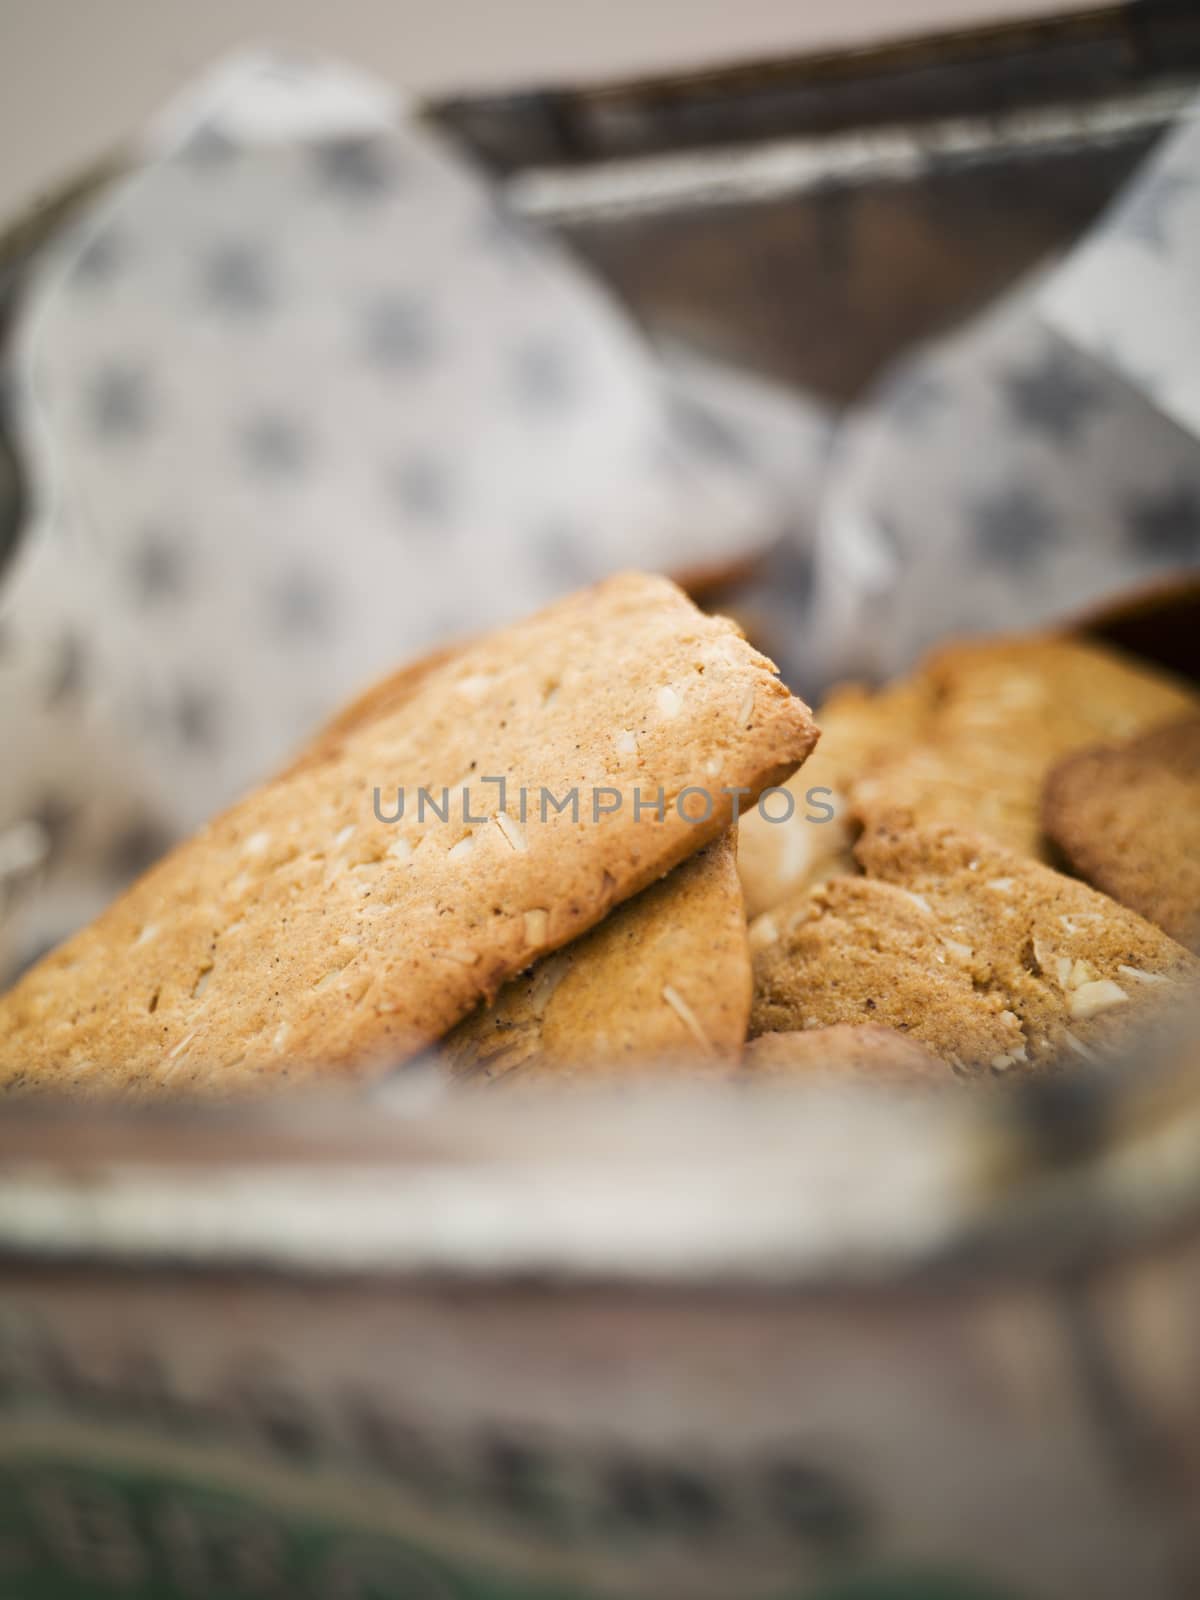 Biscuit on a plate with selective focus